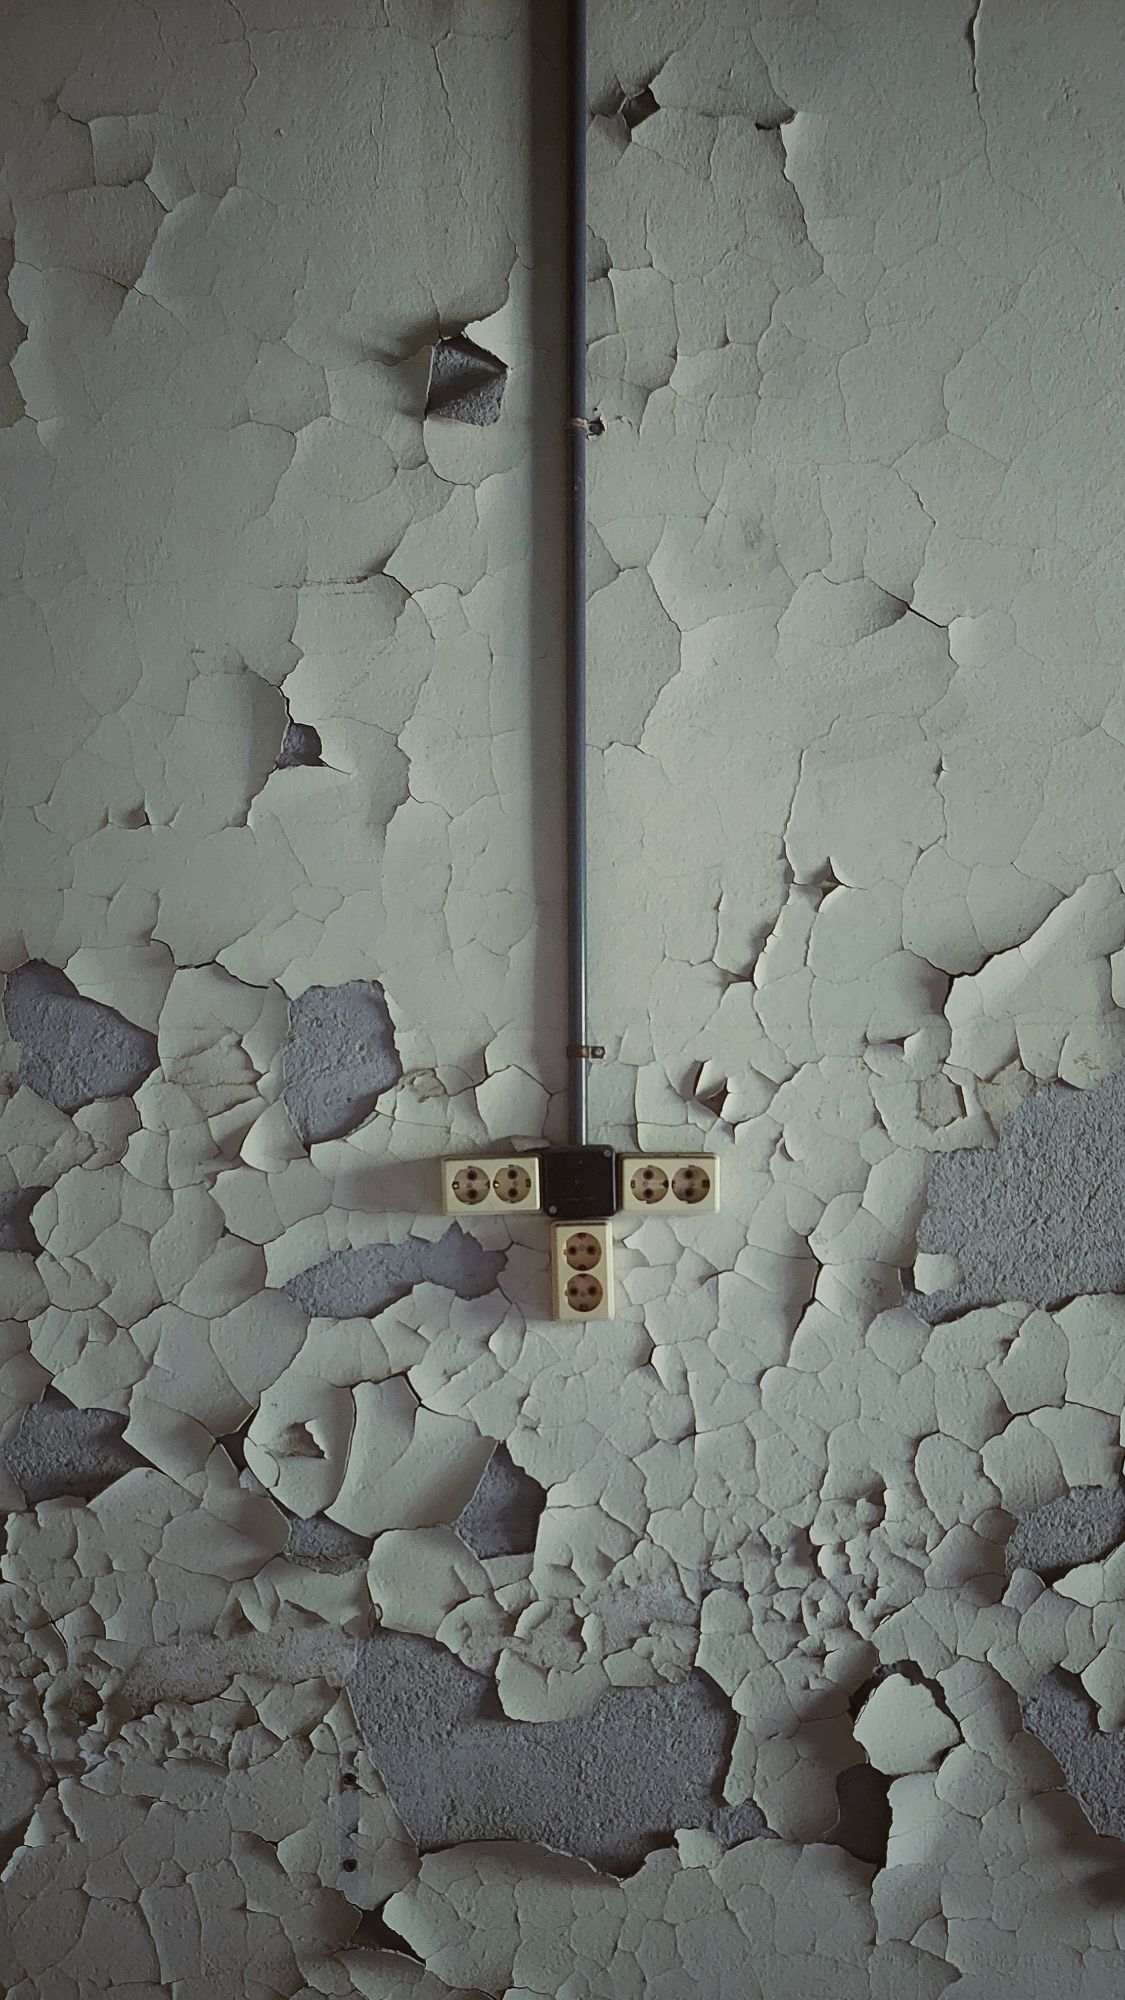 Electric sockets on an old wall.